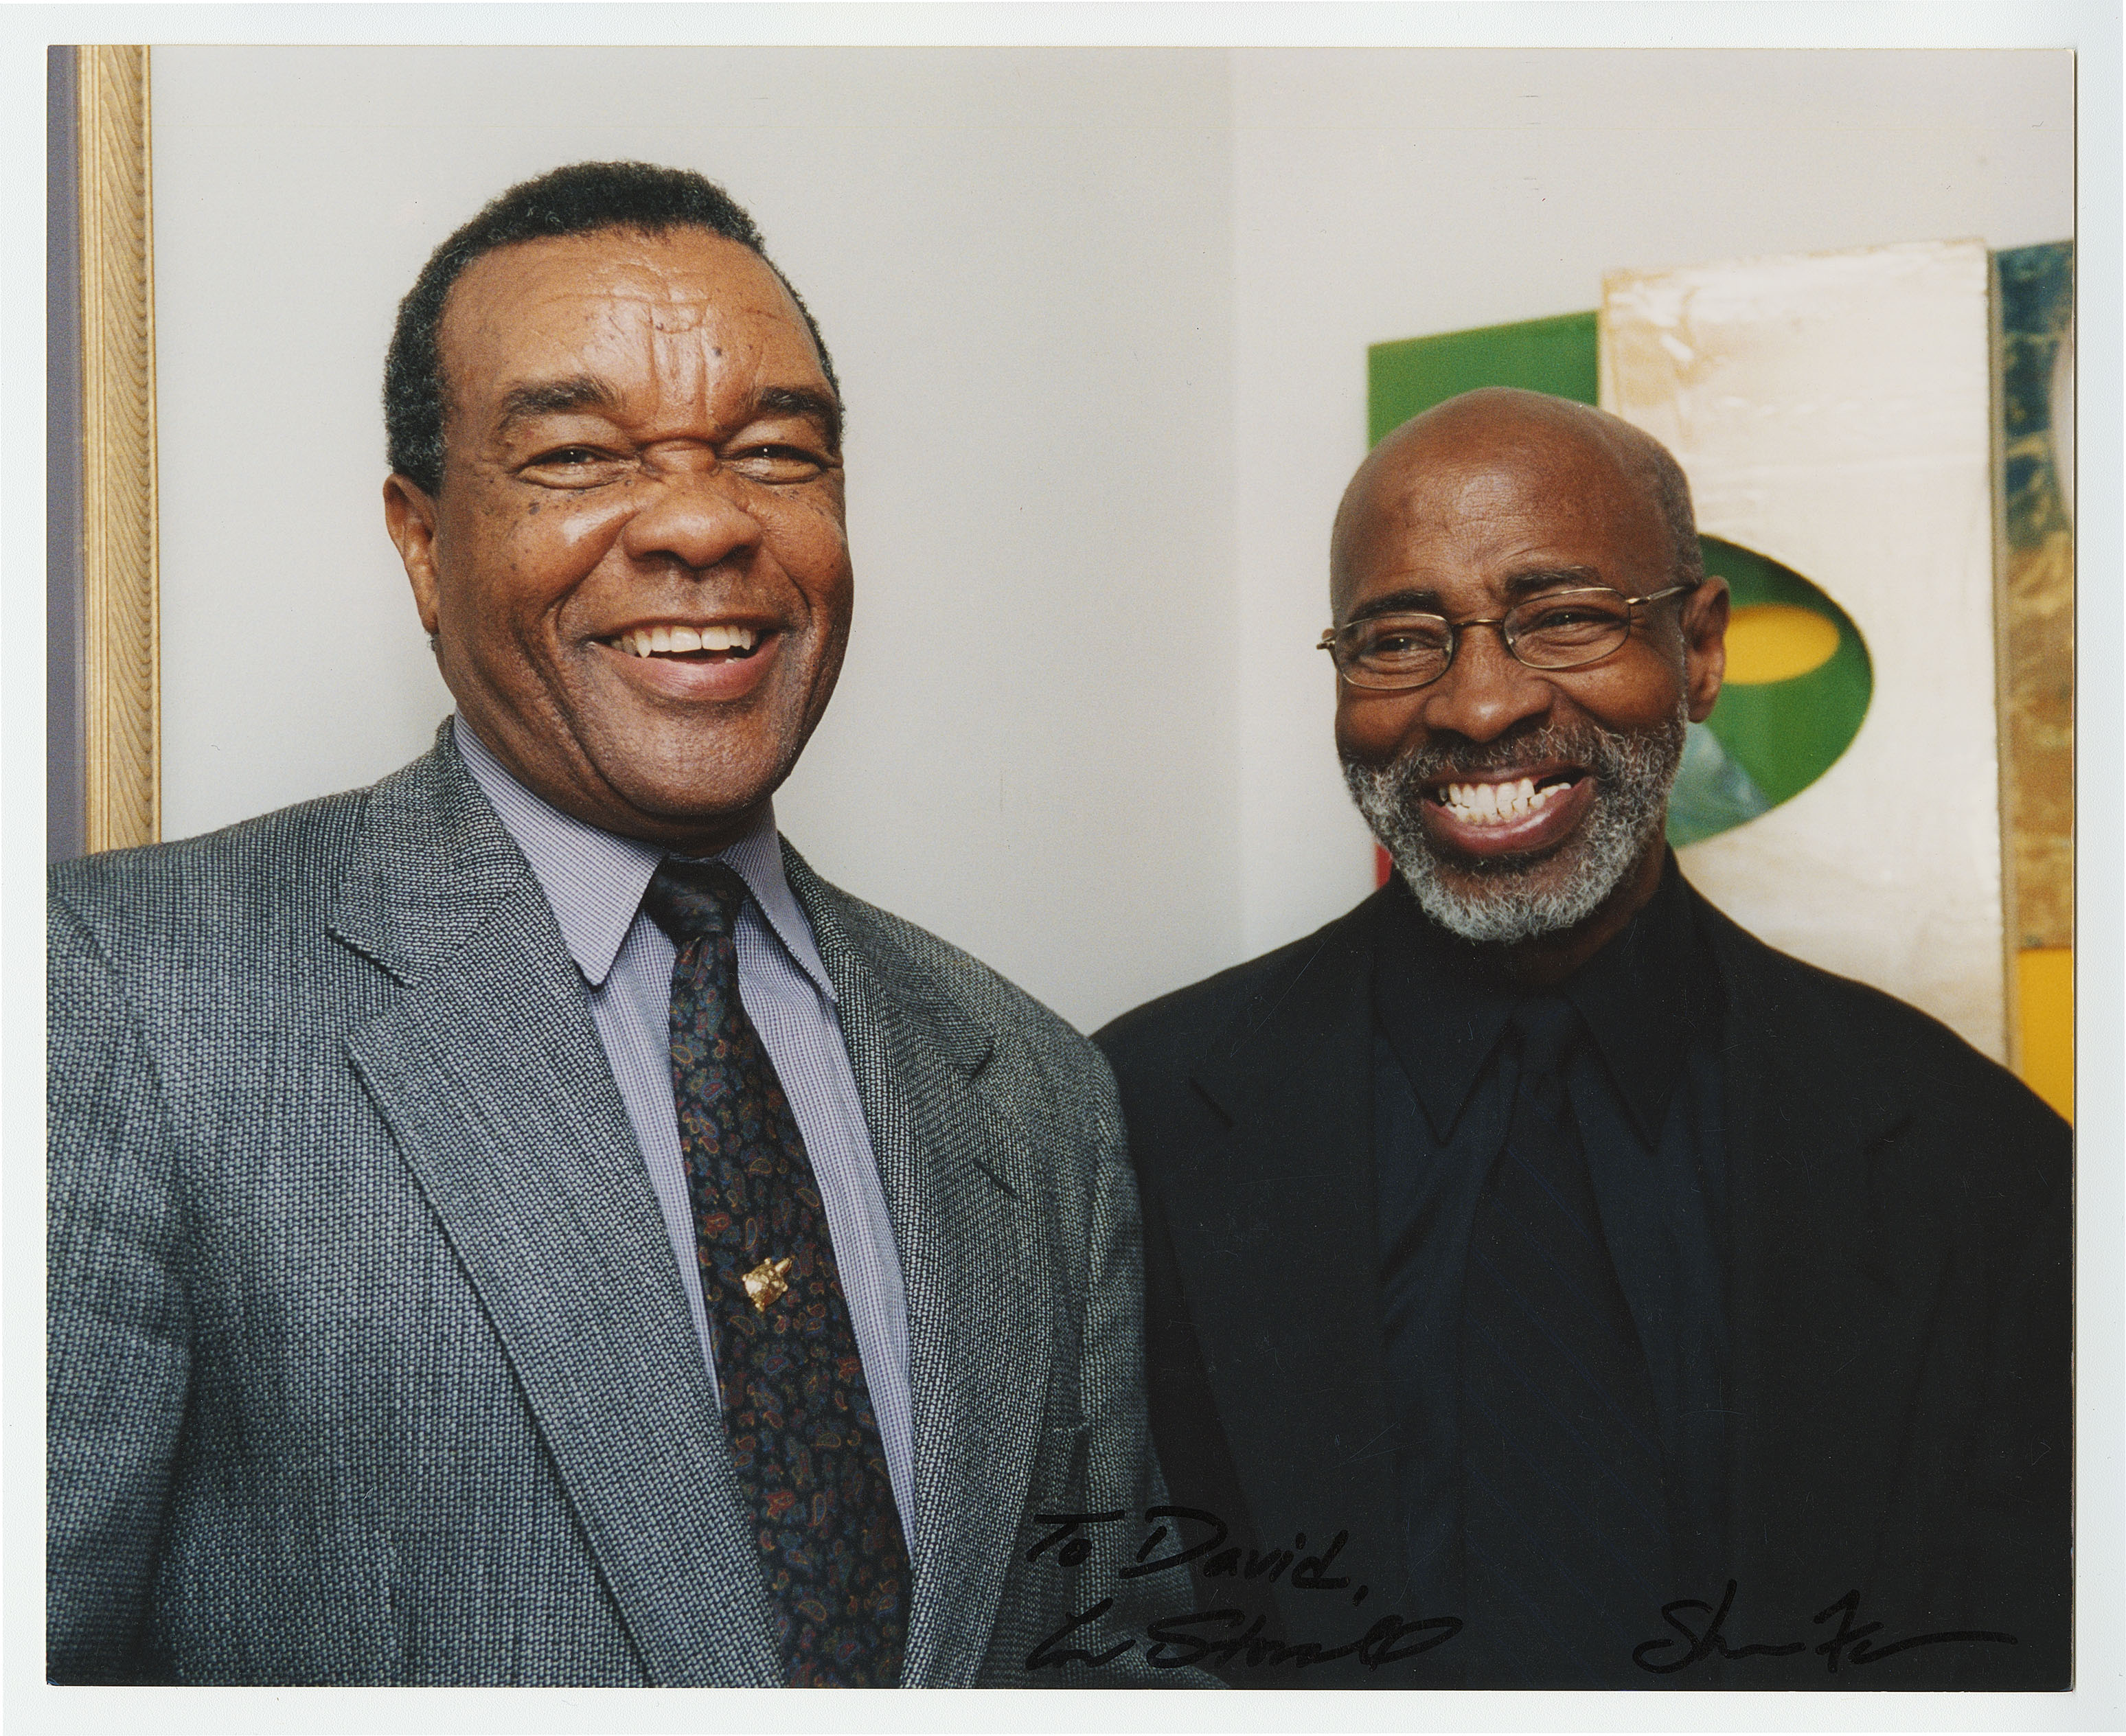 Lou Stovall with David C. Driskell at the University of Maryland, circa 2001. Image courtesy of the David C. Driskell Papers at the David C. Driskell Center at the University of Maryland, College Park. Gift of Prof. and Mrs. David C. Driskell. MS01.11.01.P0697